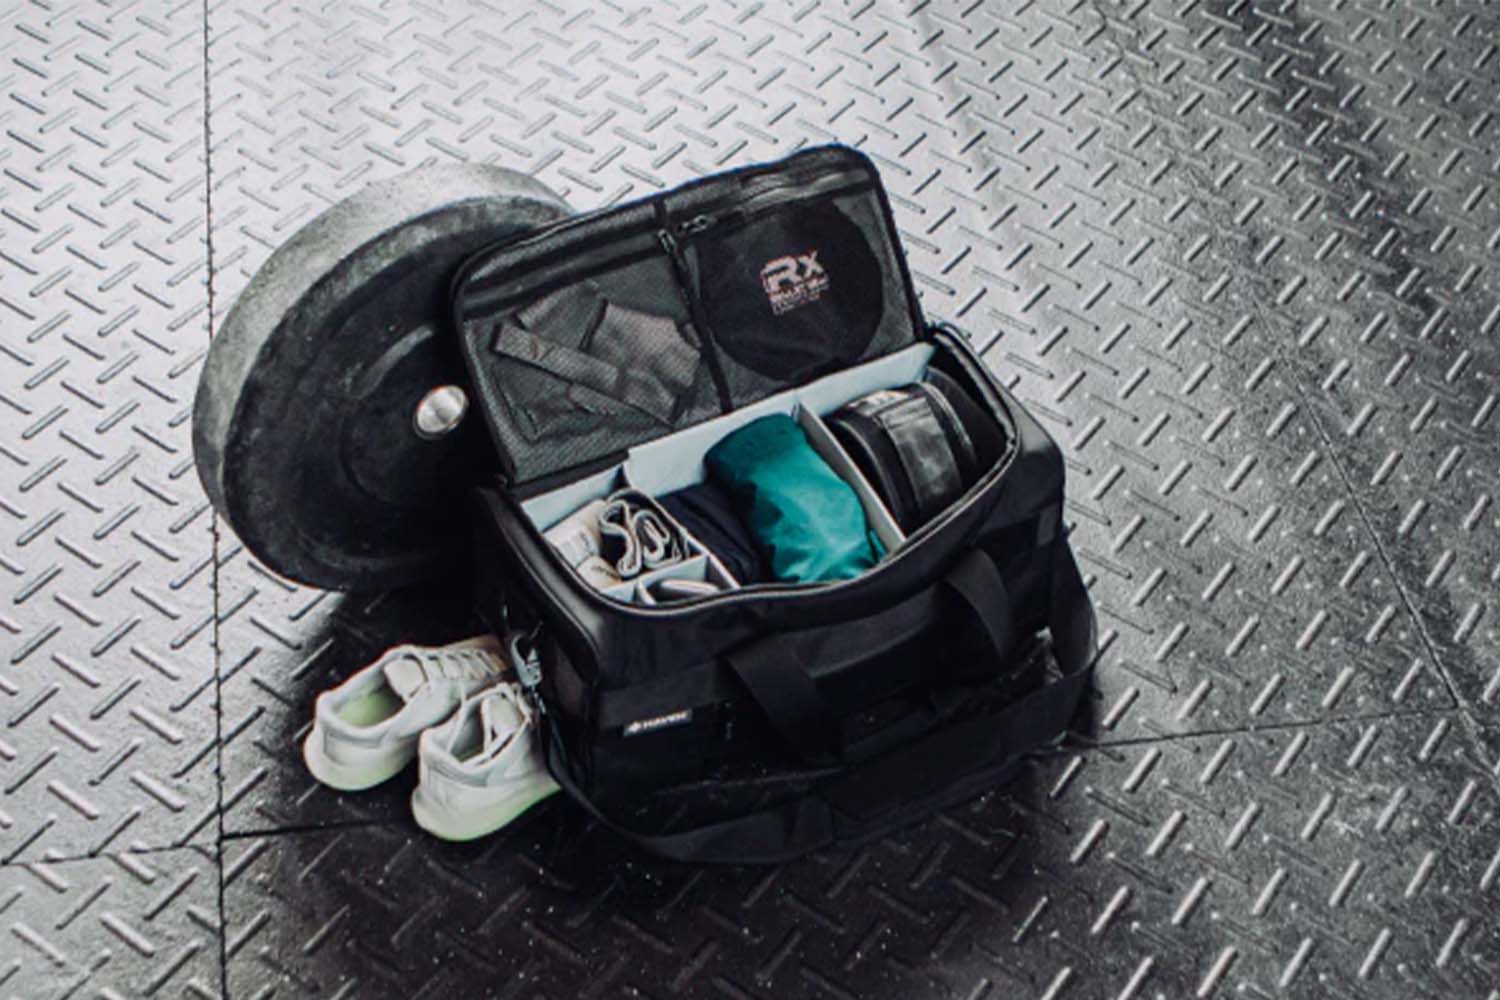 Workout Accessories Every Gym Bag Should Have